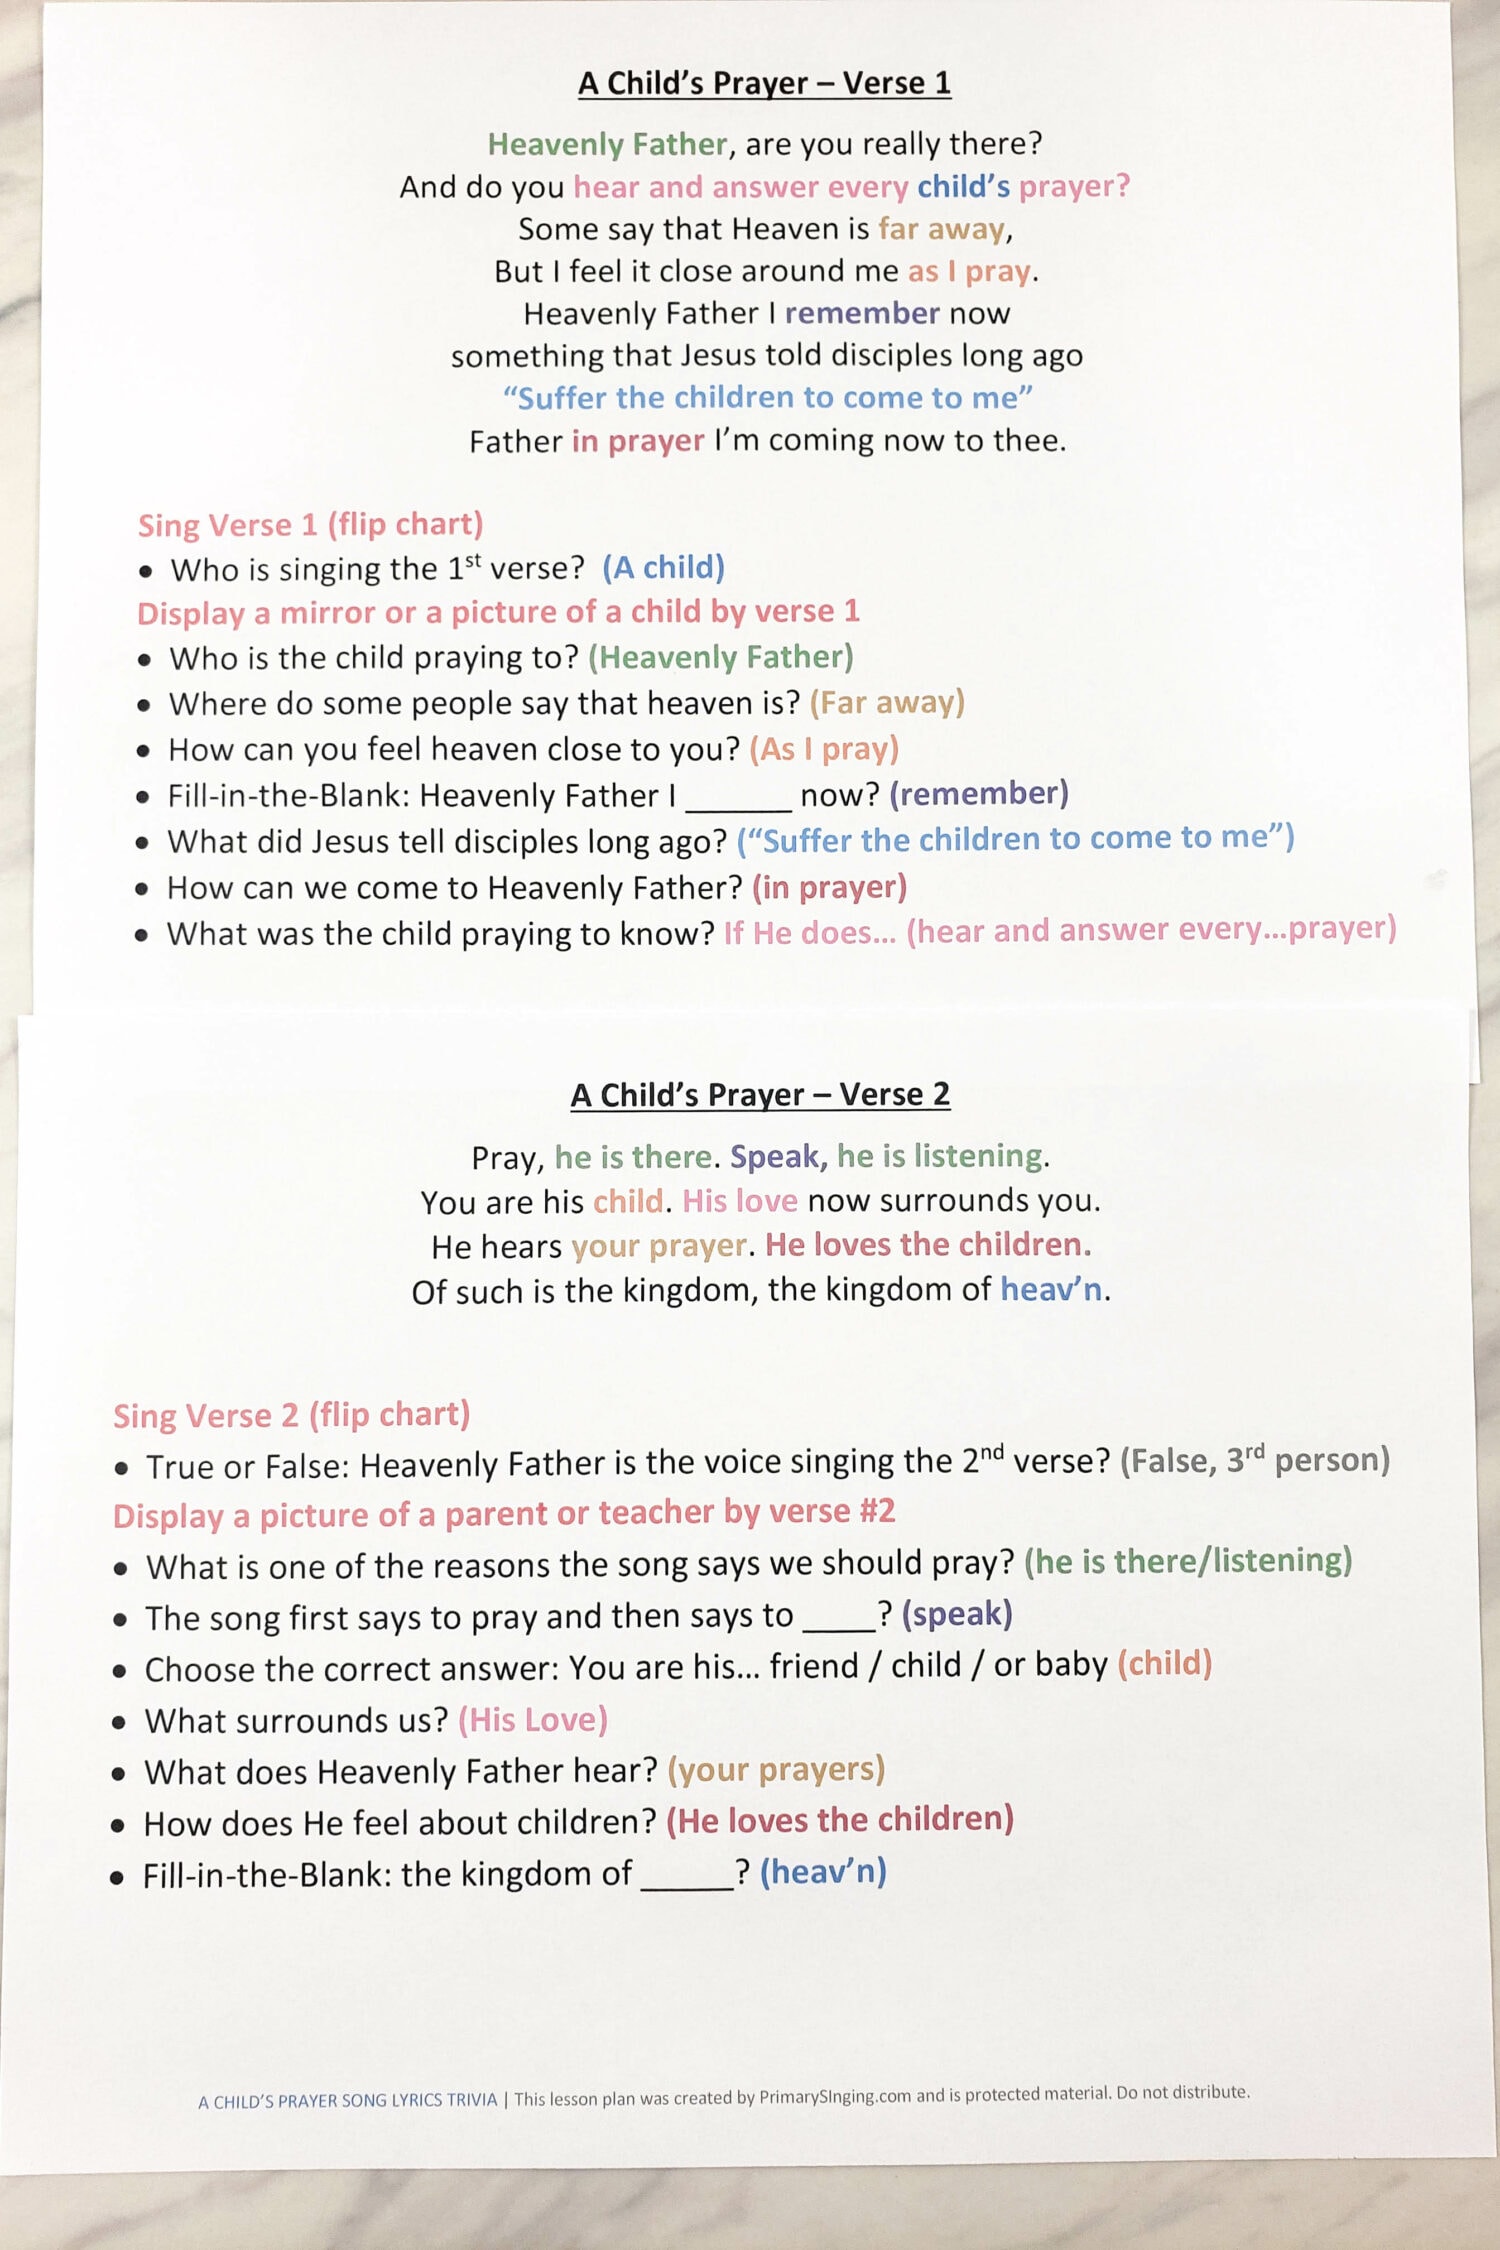 A Child's Prayer song lyrics trivia a fun printable trivia game to help the kids learn and reinforce the words of this song with singing time song helps for LDS Primary Music Leaders. 